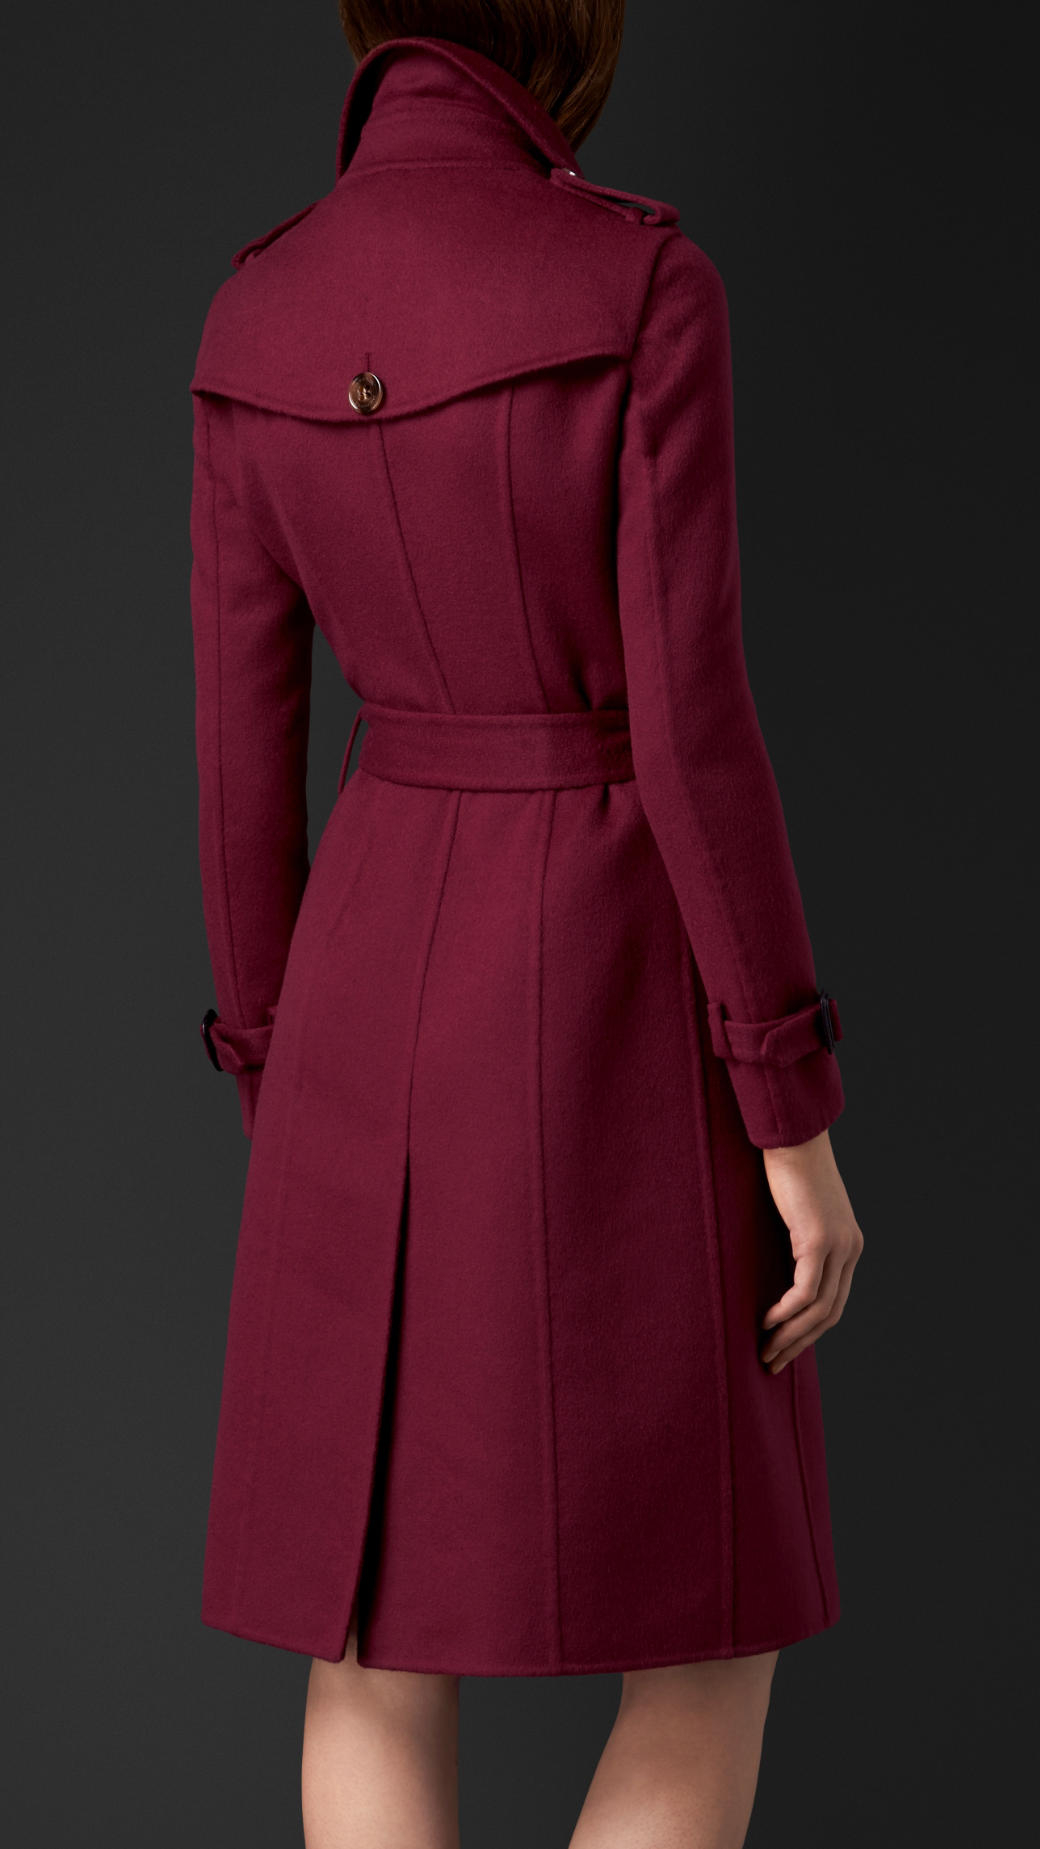 Burberry Cashmere Trench Coat in Magenta Pink (Purple) - Lyst